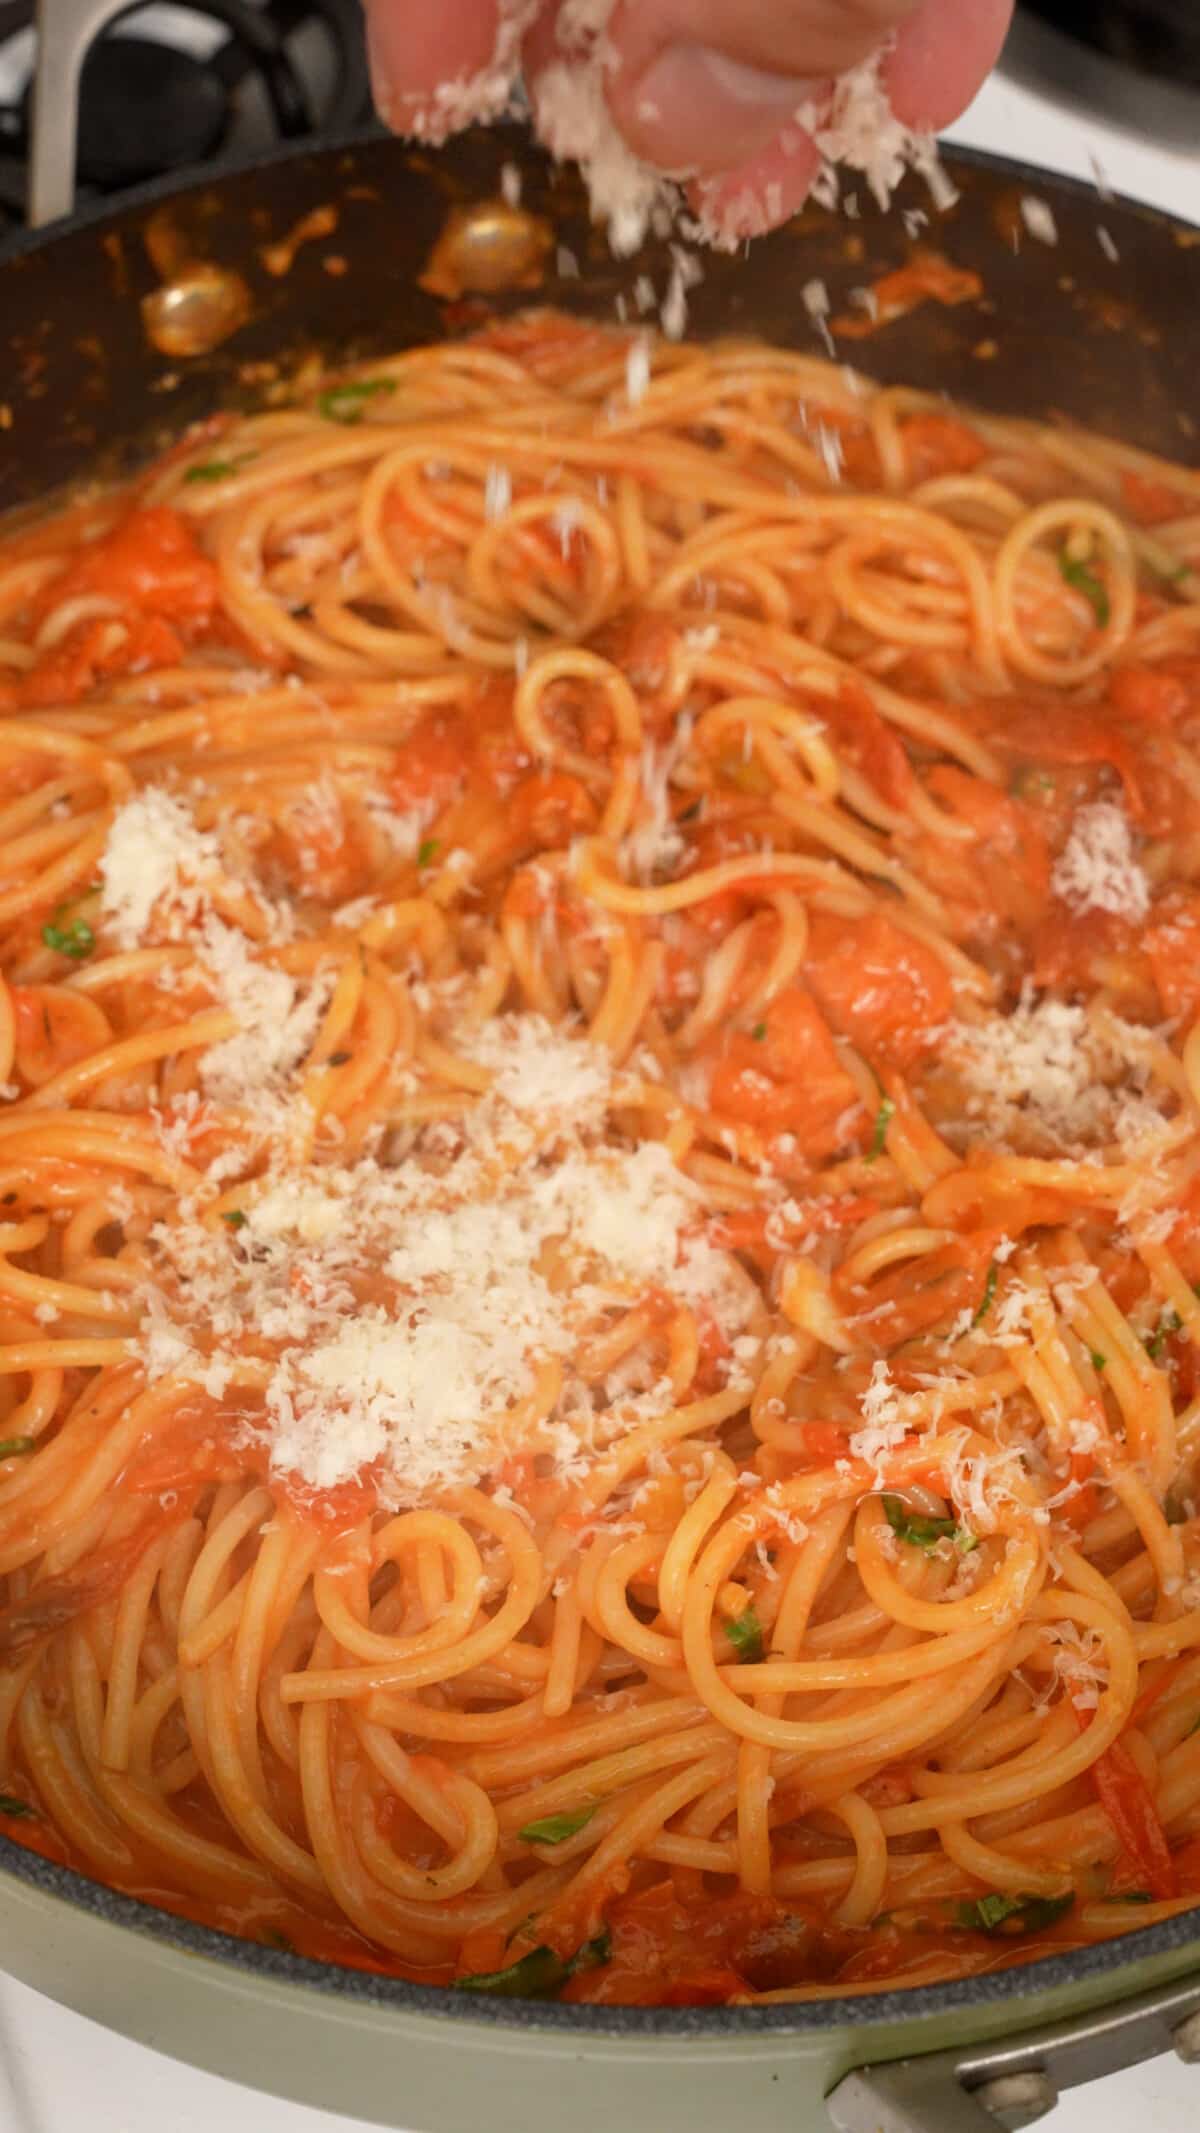 Parmesan cheese being added to the Cherry Tomato Pasta in a pan.